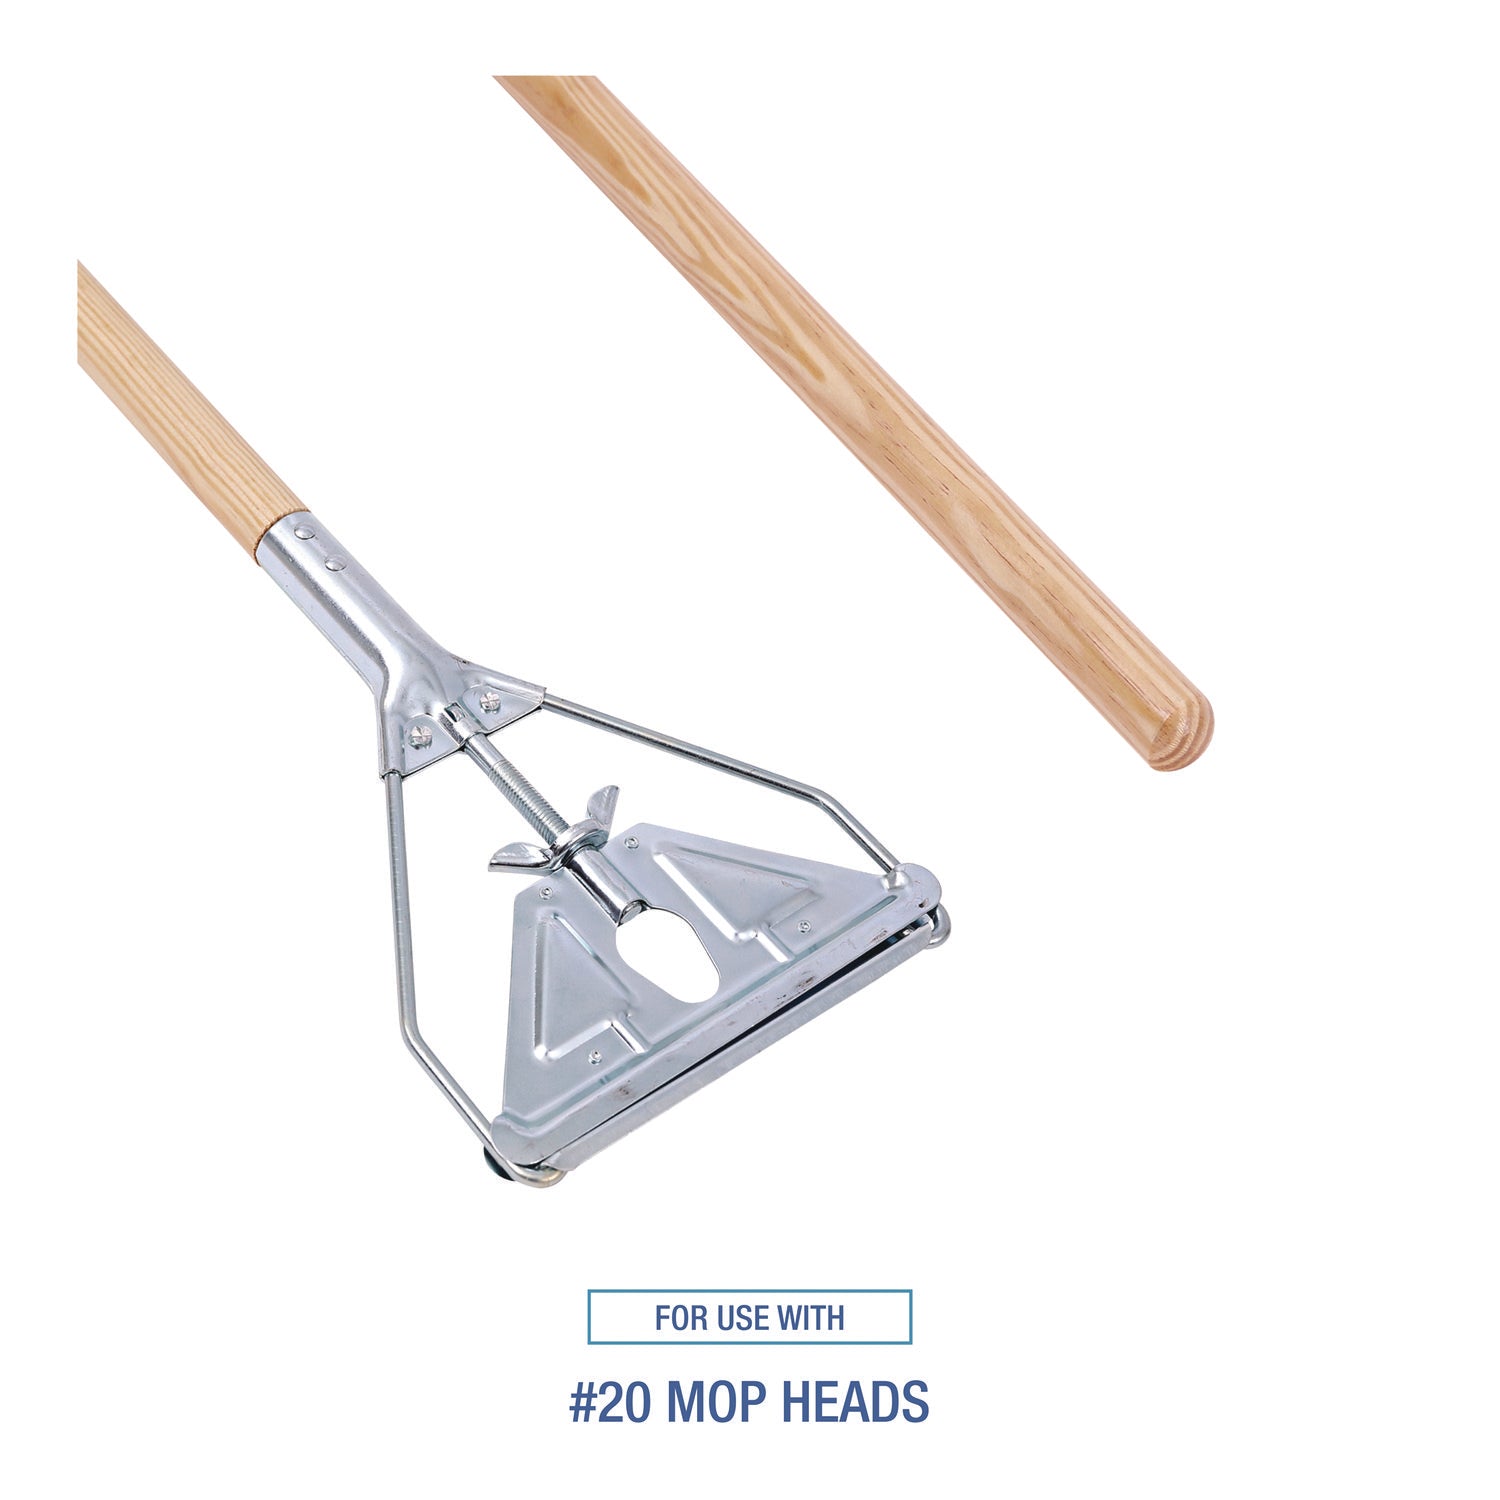 quick-change-metal-head-mop-handle-for-no-20-and-up-heads-62-wood-handle_bwk605 - 3